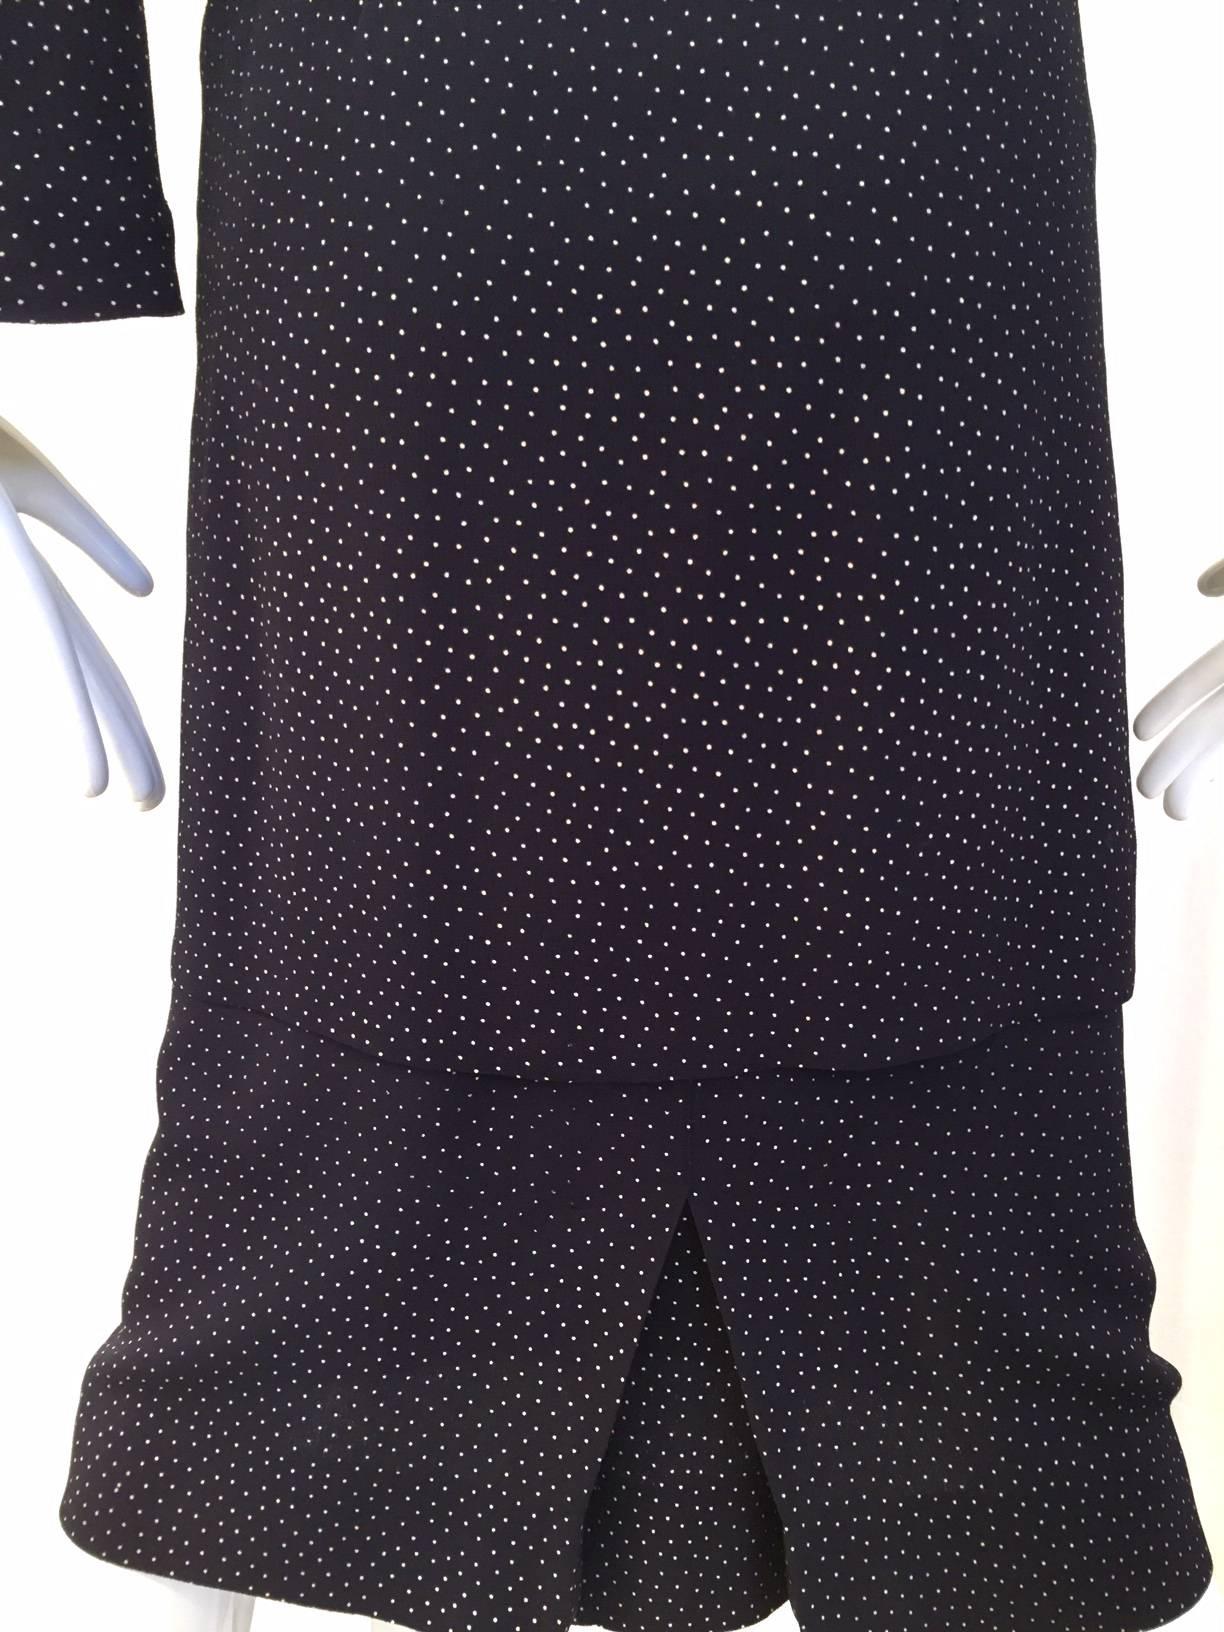 Vintage 1940s Navy Blue Crepe Dress with White Small Polkadots 2